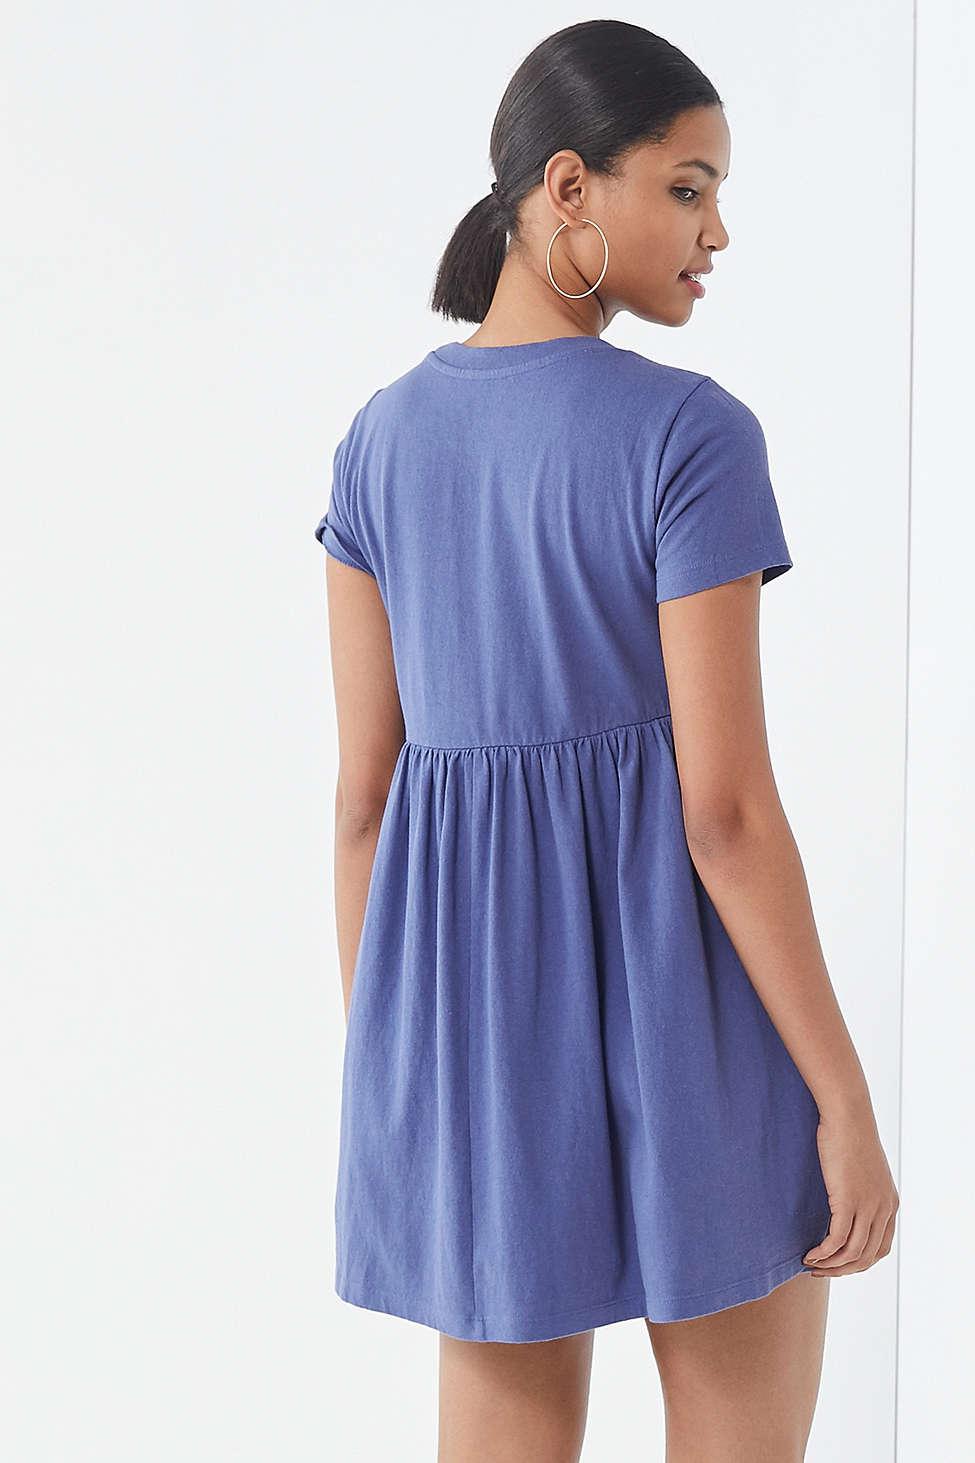 Urban Outfitters Uo Alexa Babydoll T-shirt Dress in Blue | Lyst